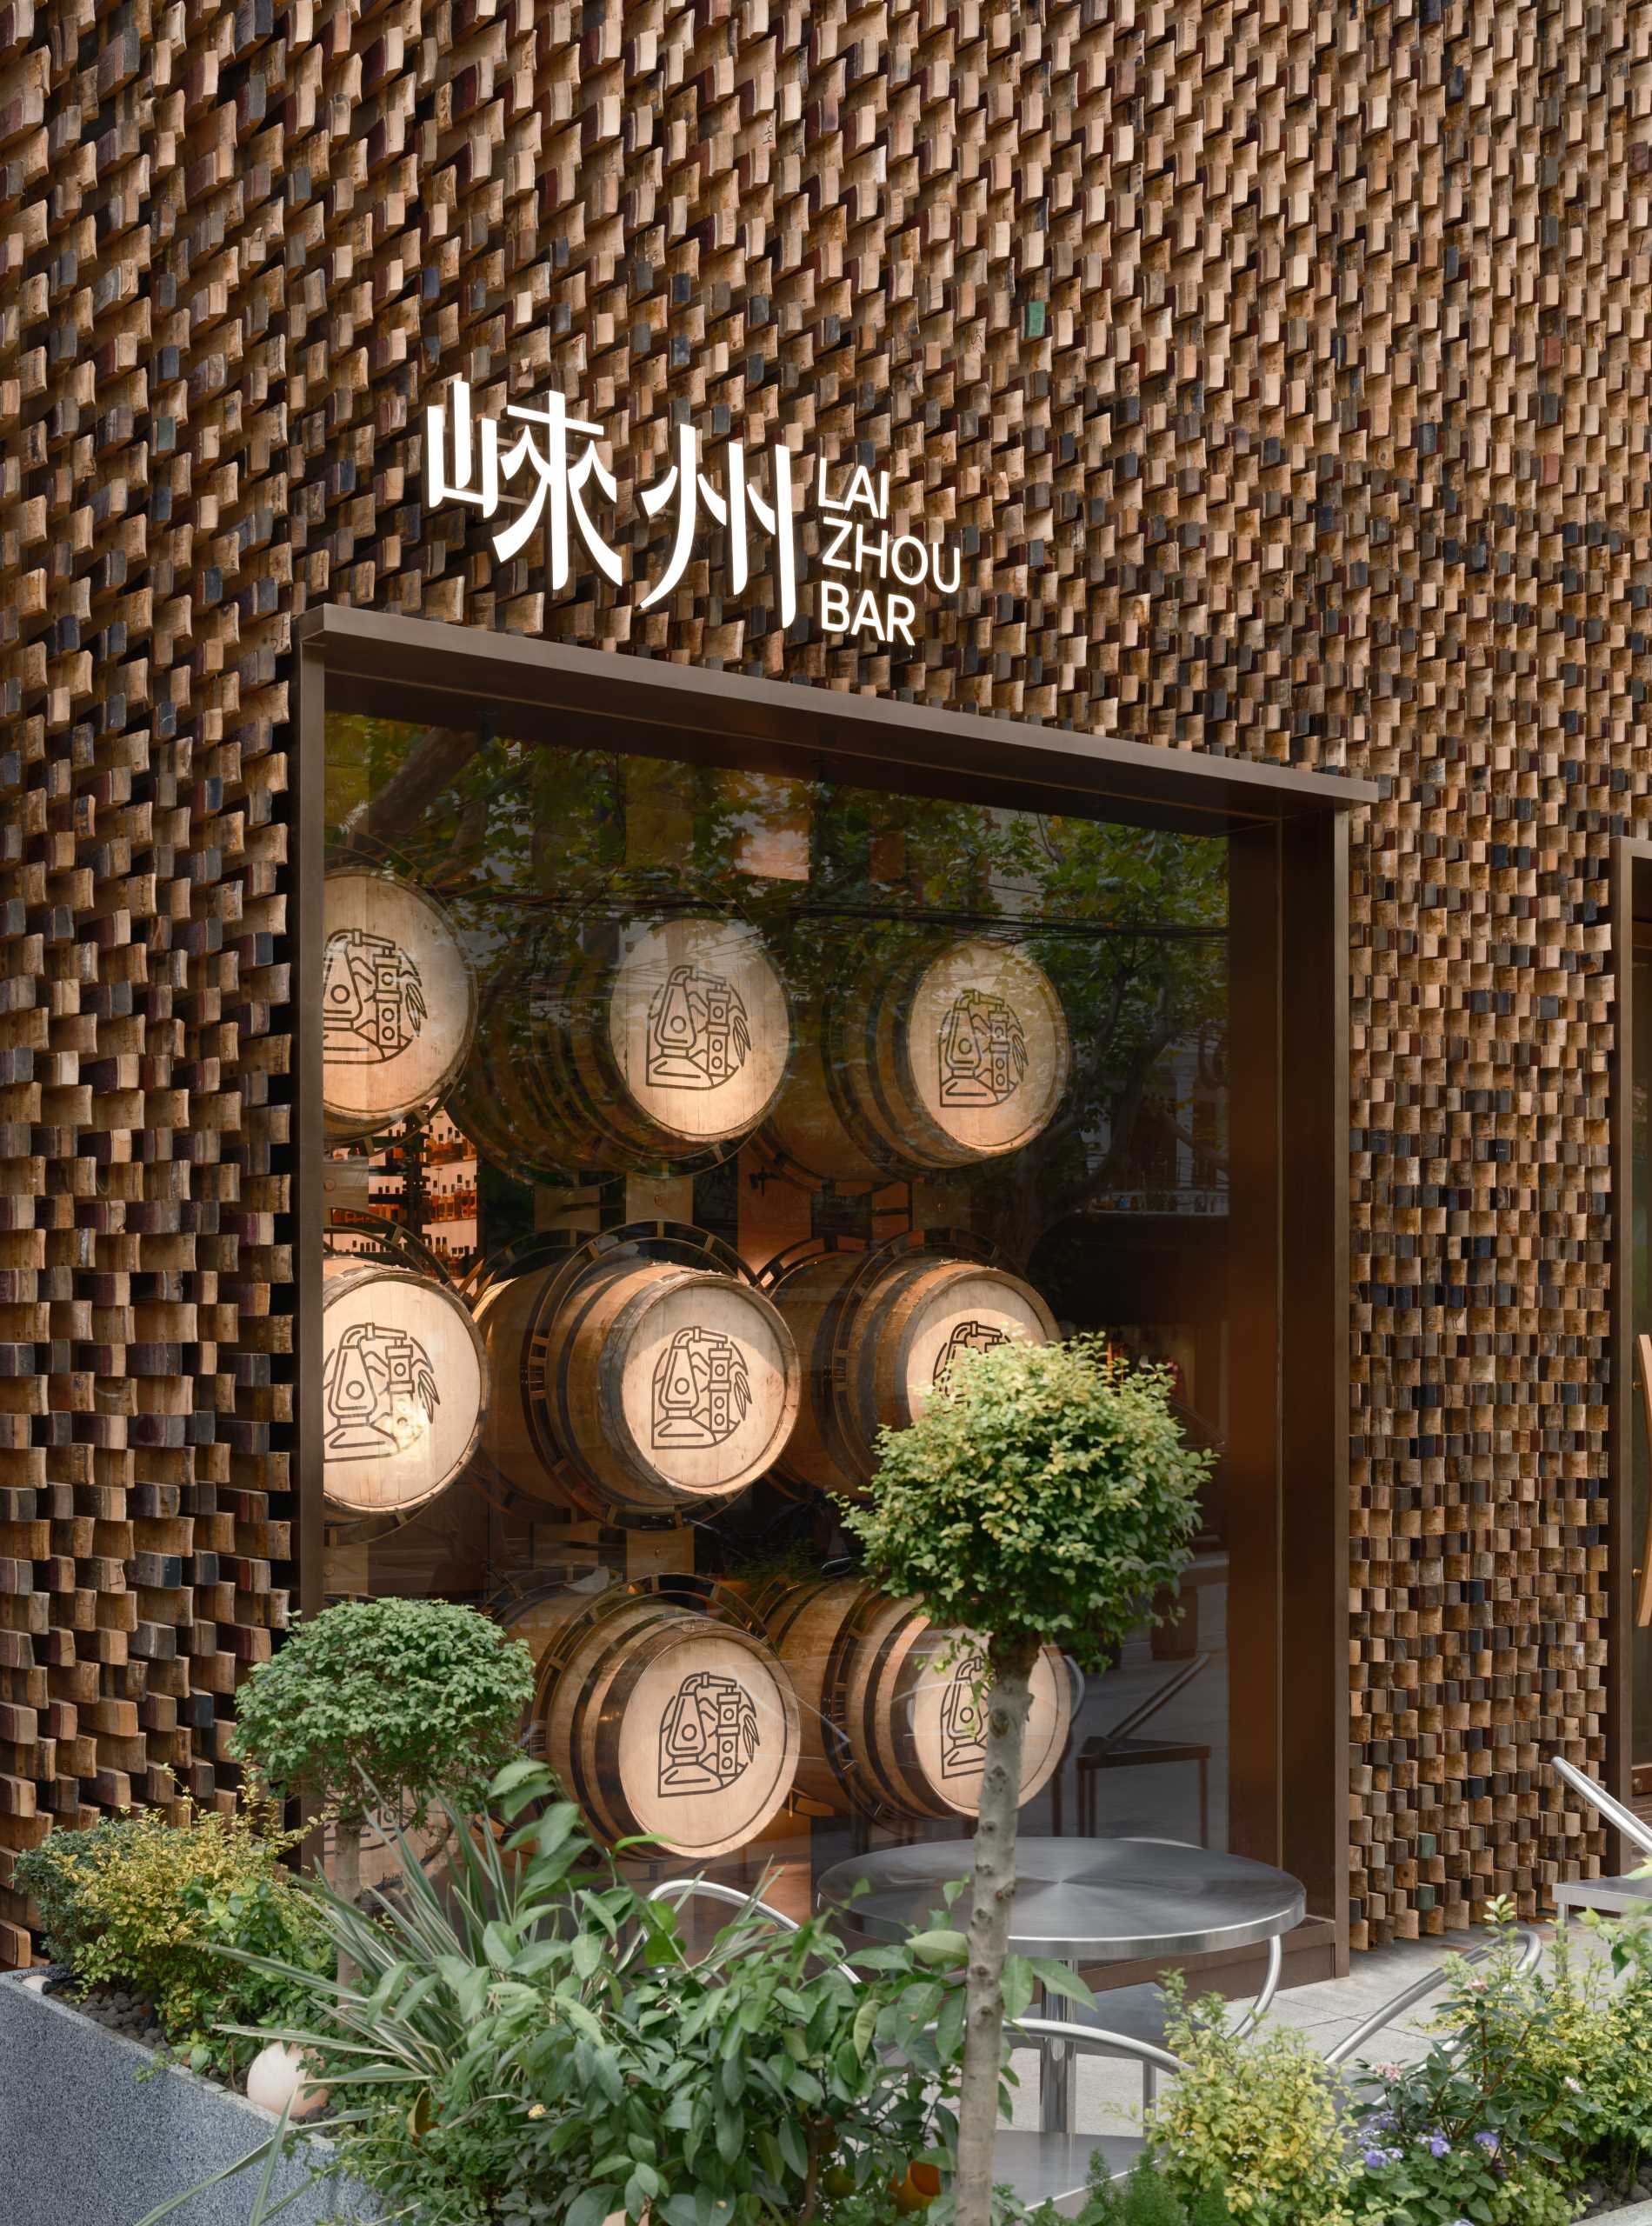 6000 pieces of discarded wooden whiskey barrels were recycled to make the facade of this modern bar.